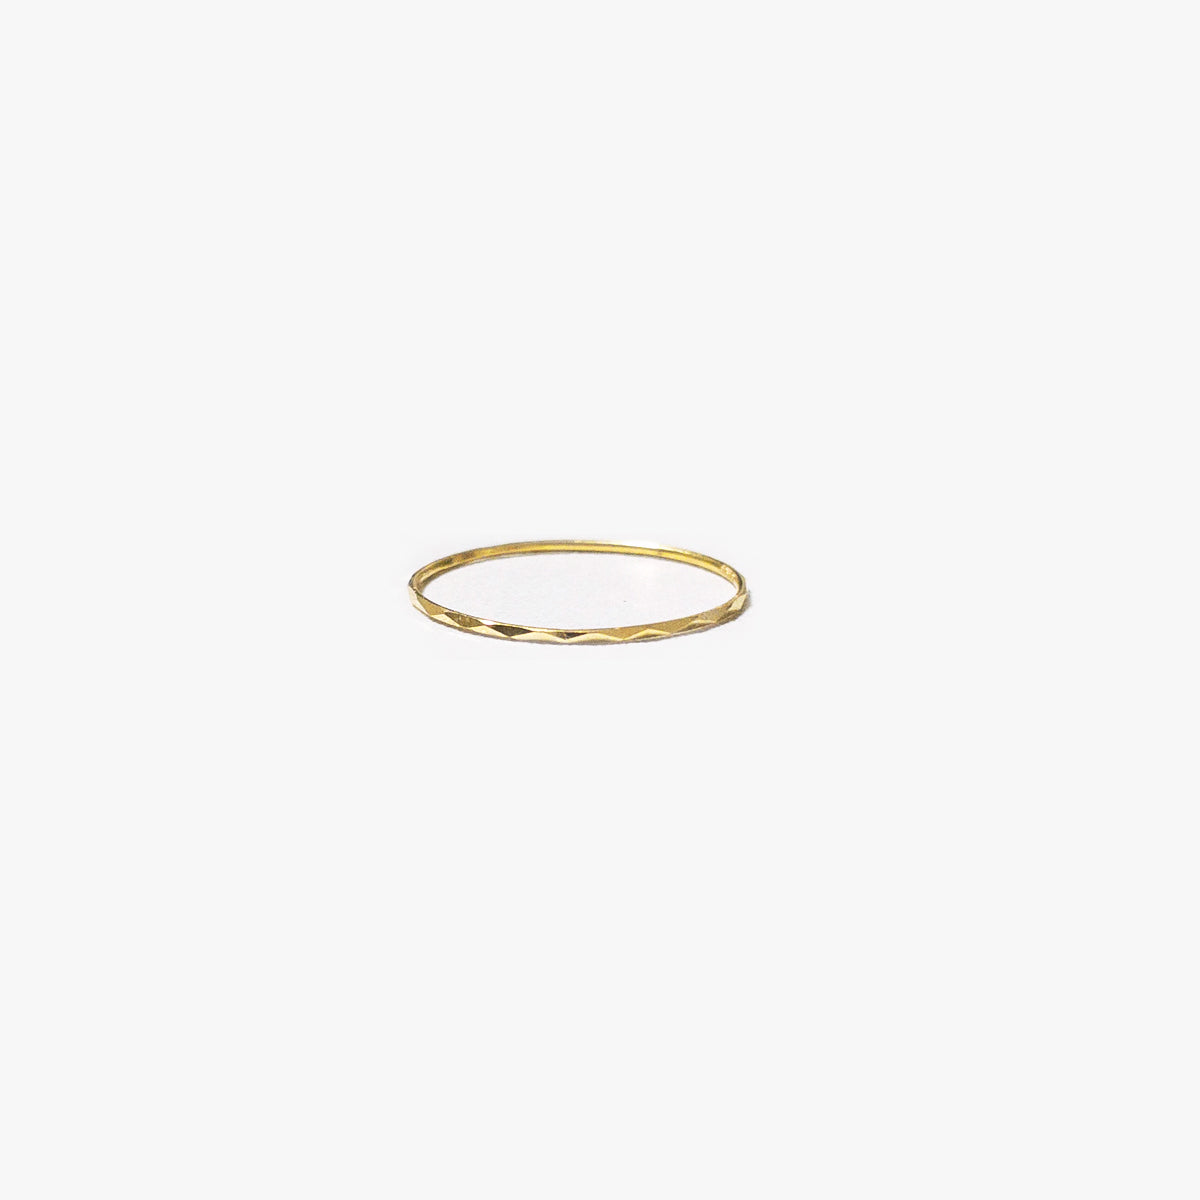 The Ultra Skinny Textured Ring in Solid Gold